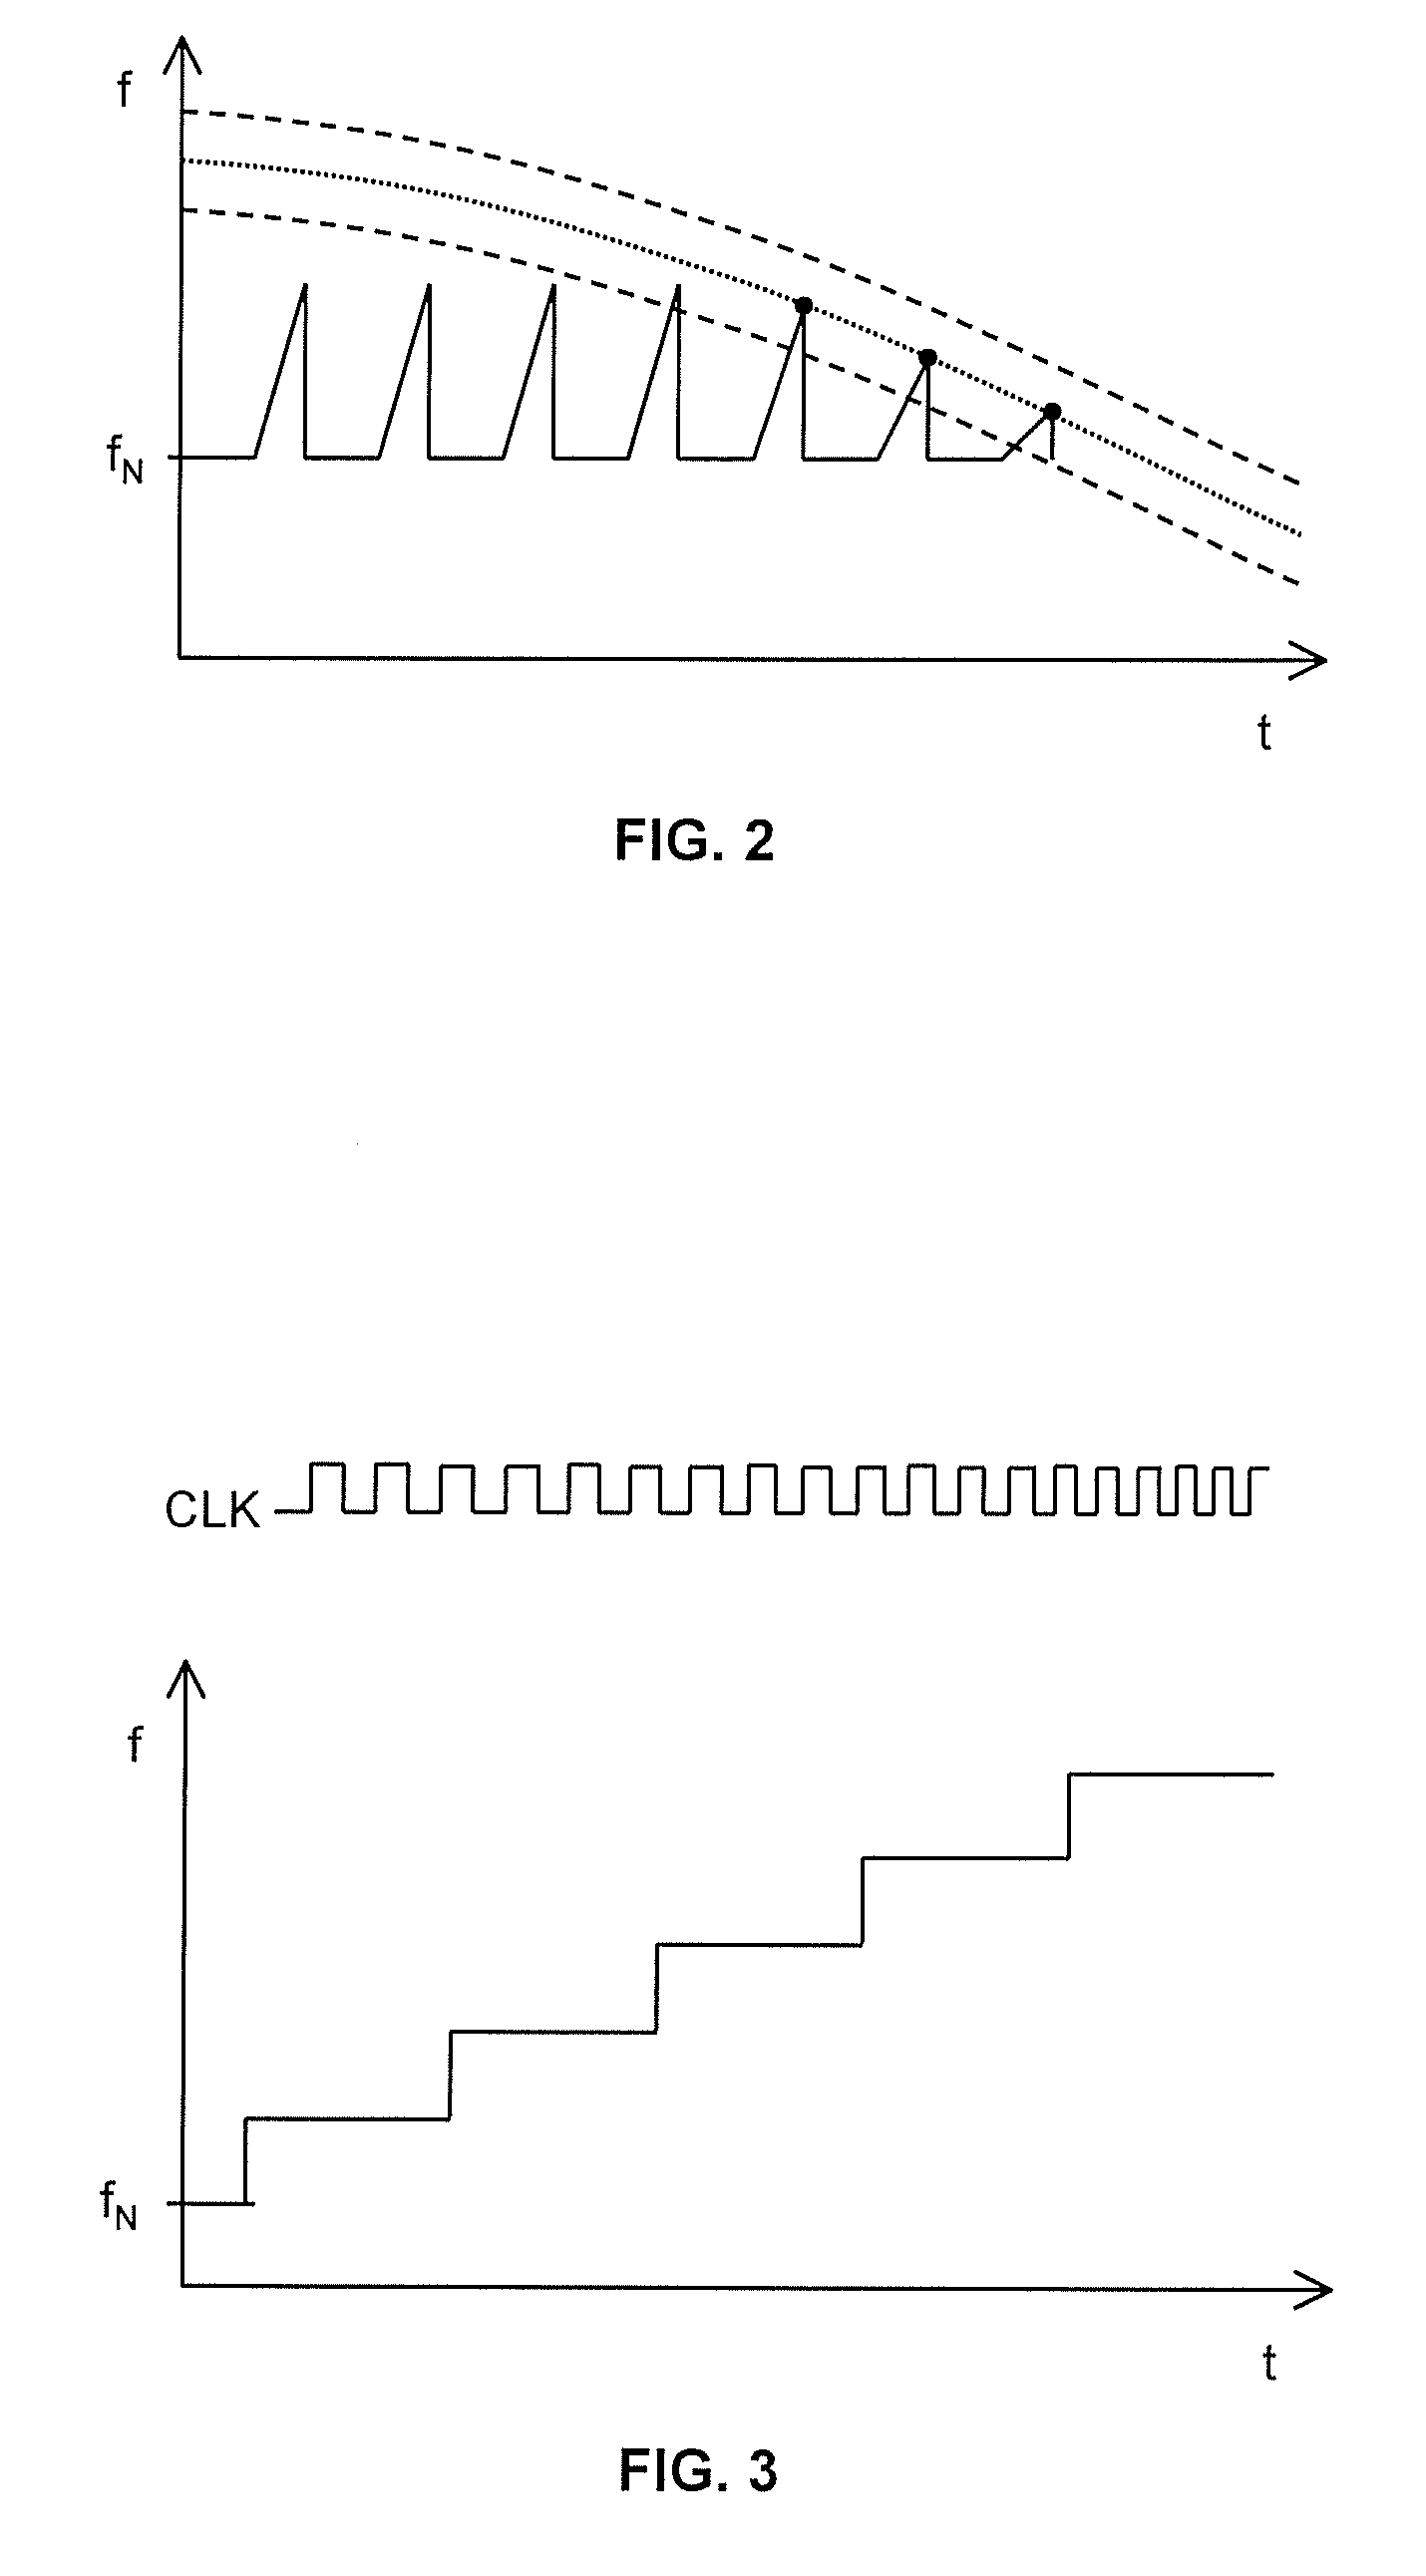 Error Detection in an Integrated Circuit